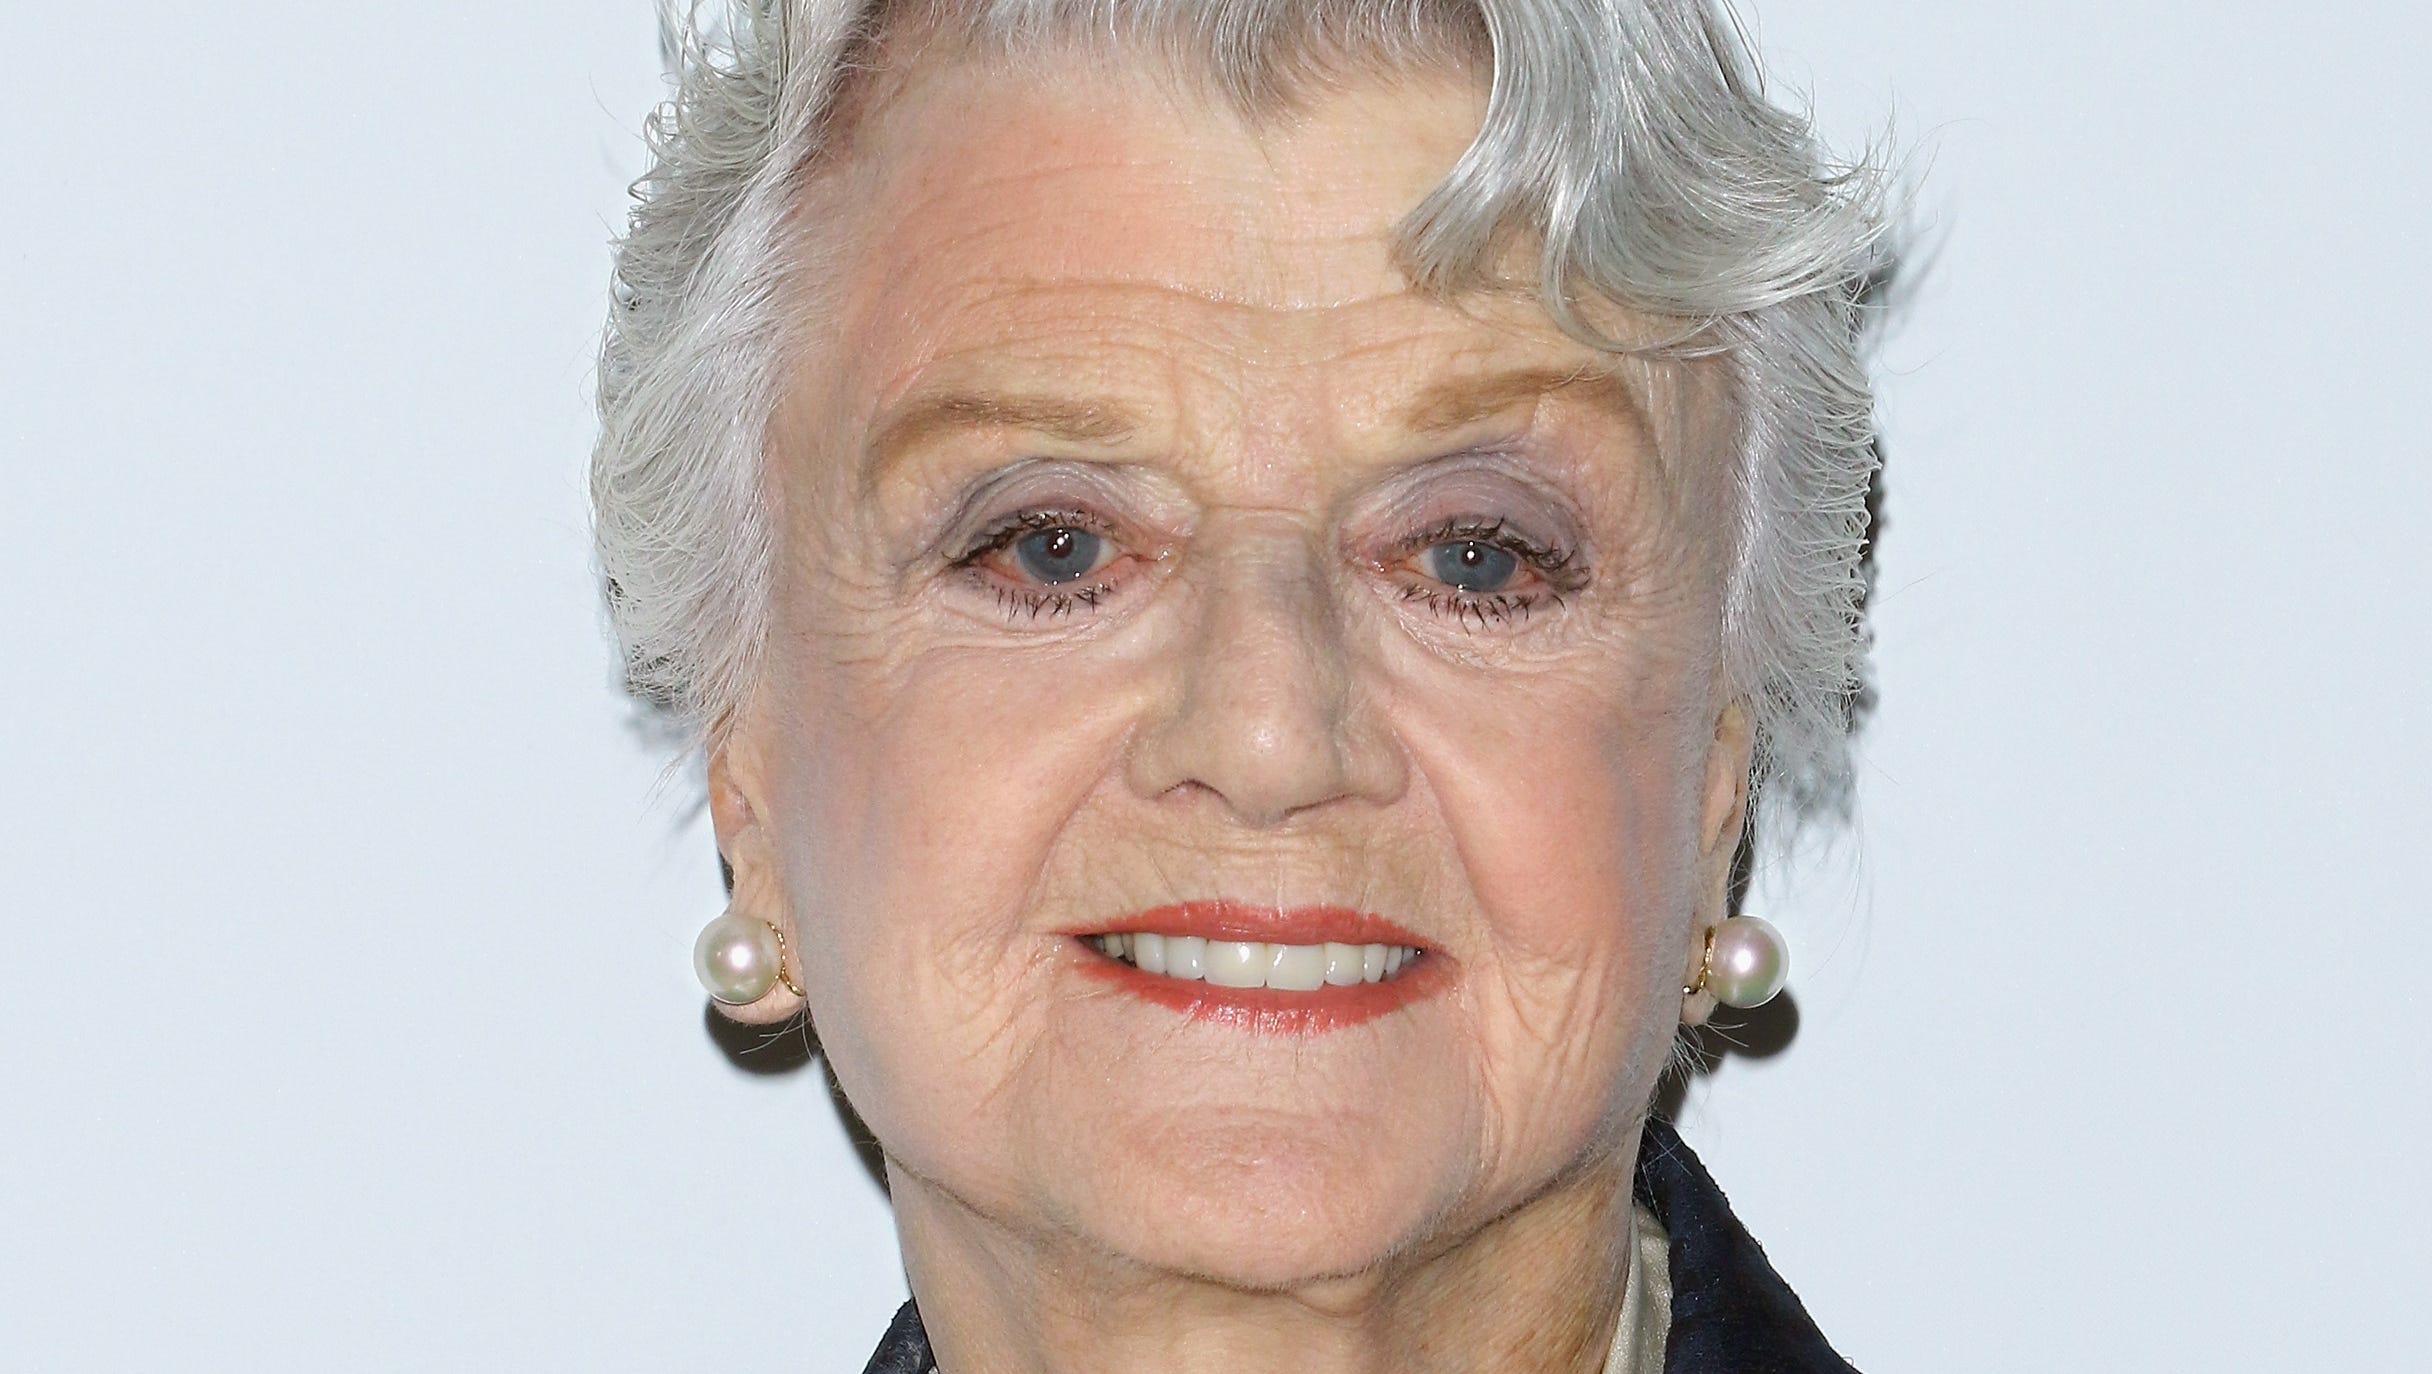 Angela Lansbury Says Sexual Harassment Remarks Taken Out Of Context